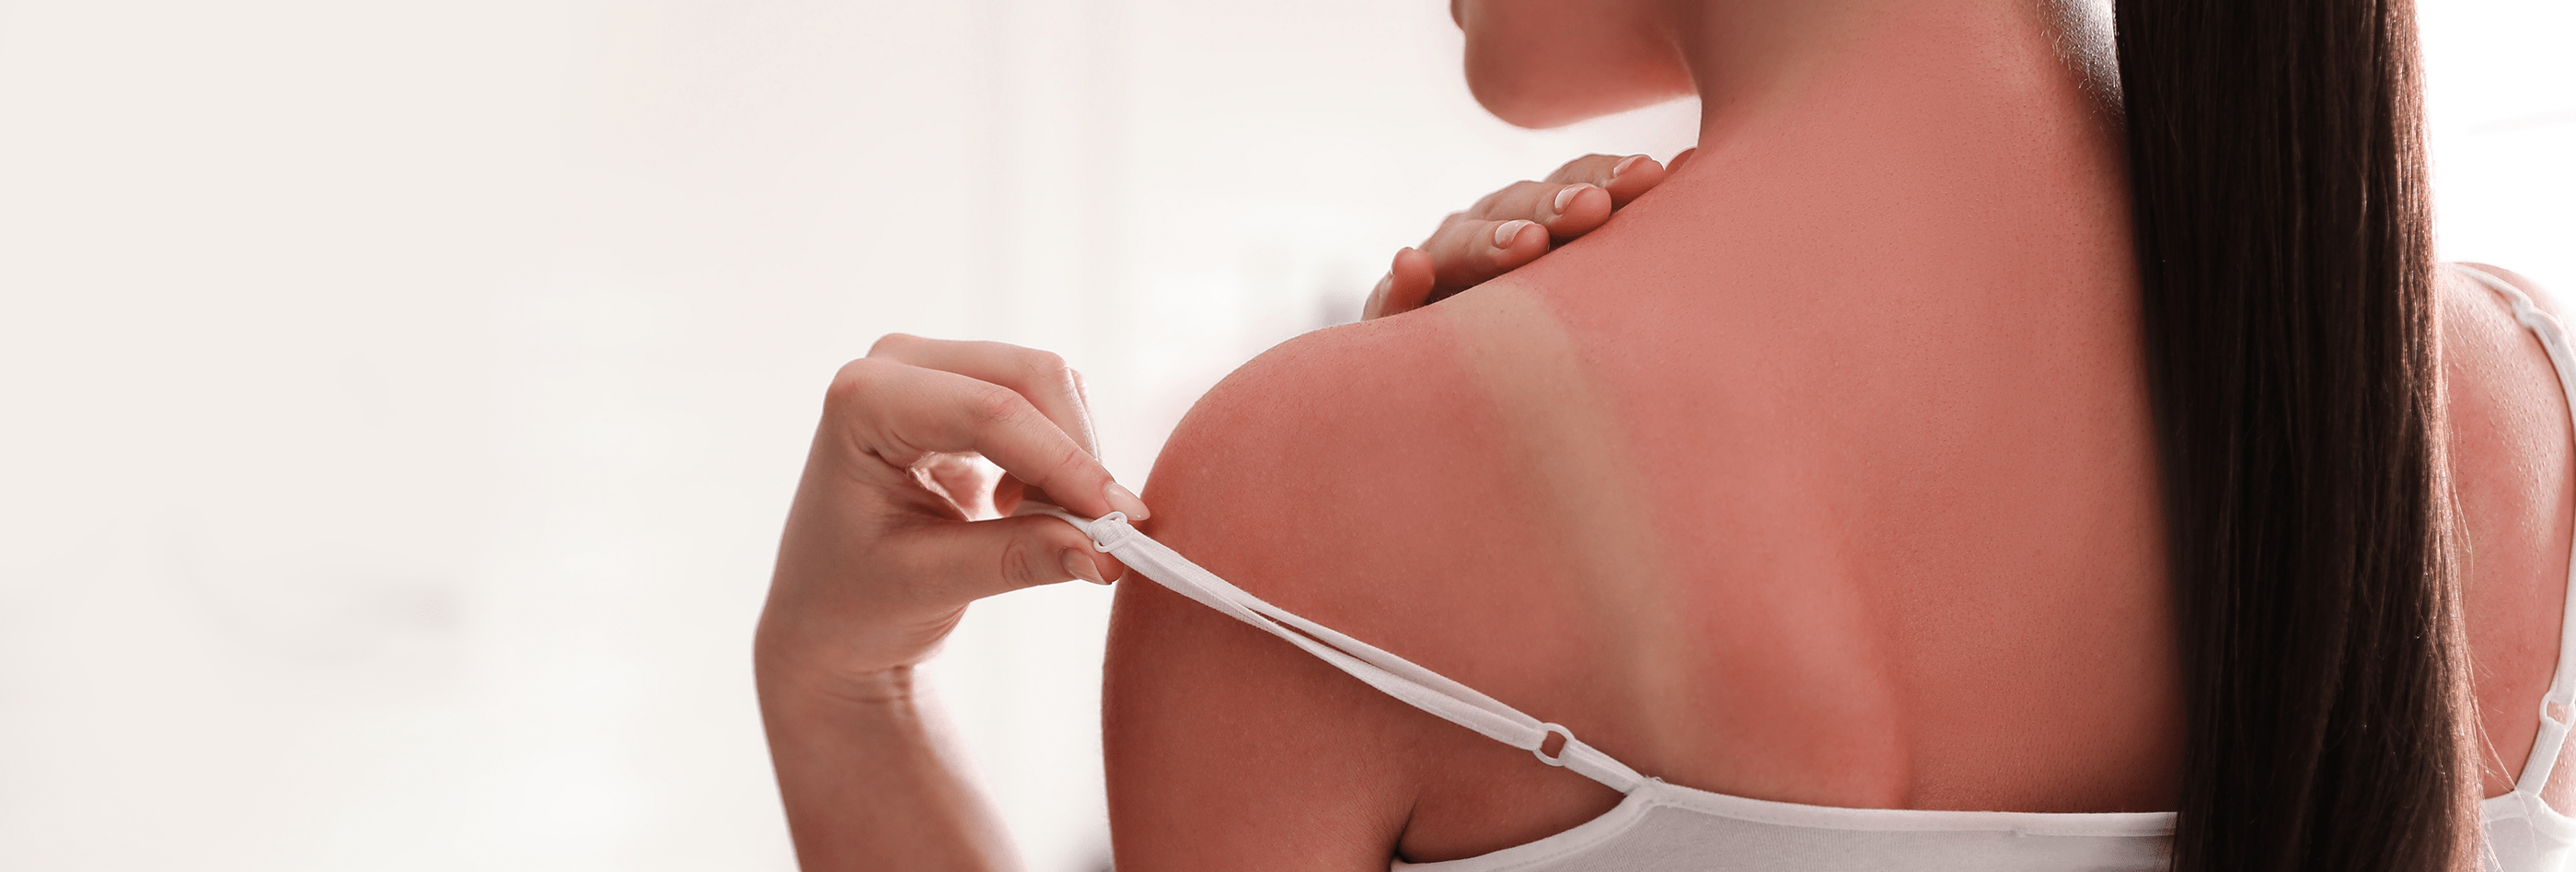 How to treat a sunburn - Reviewed